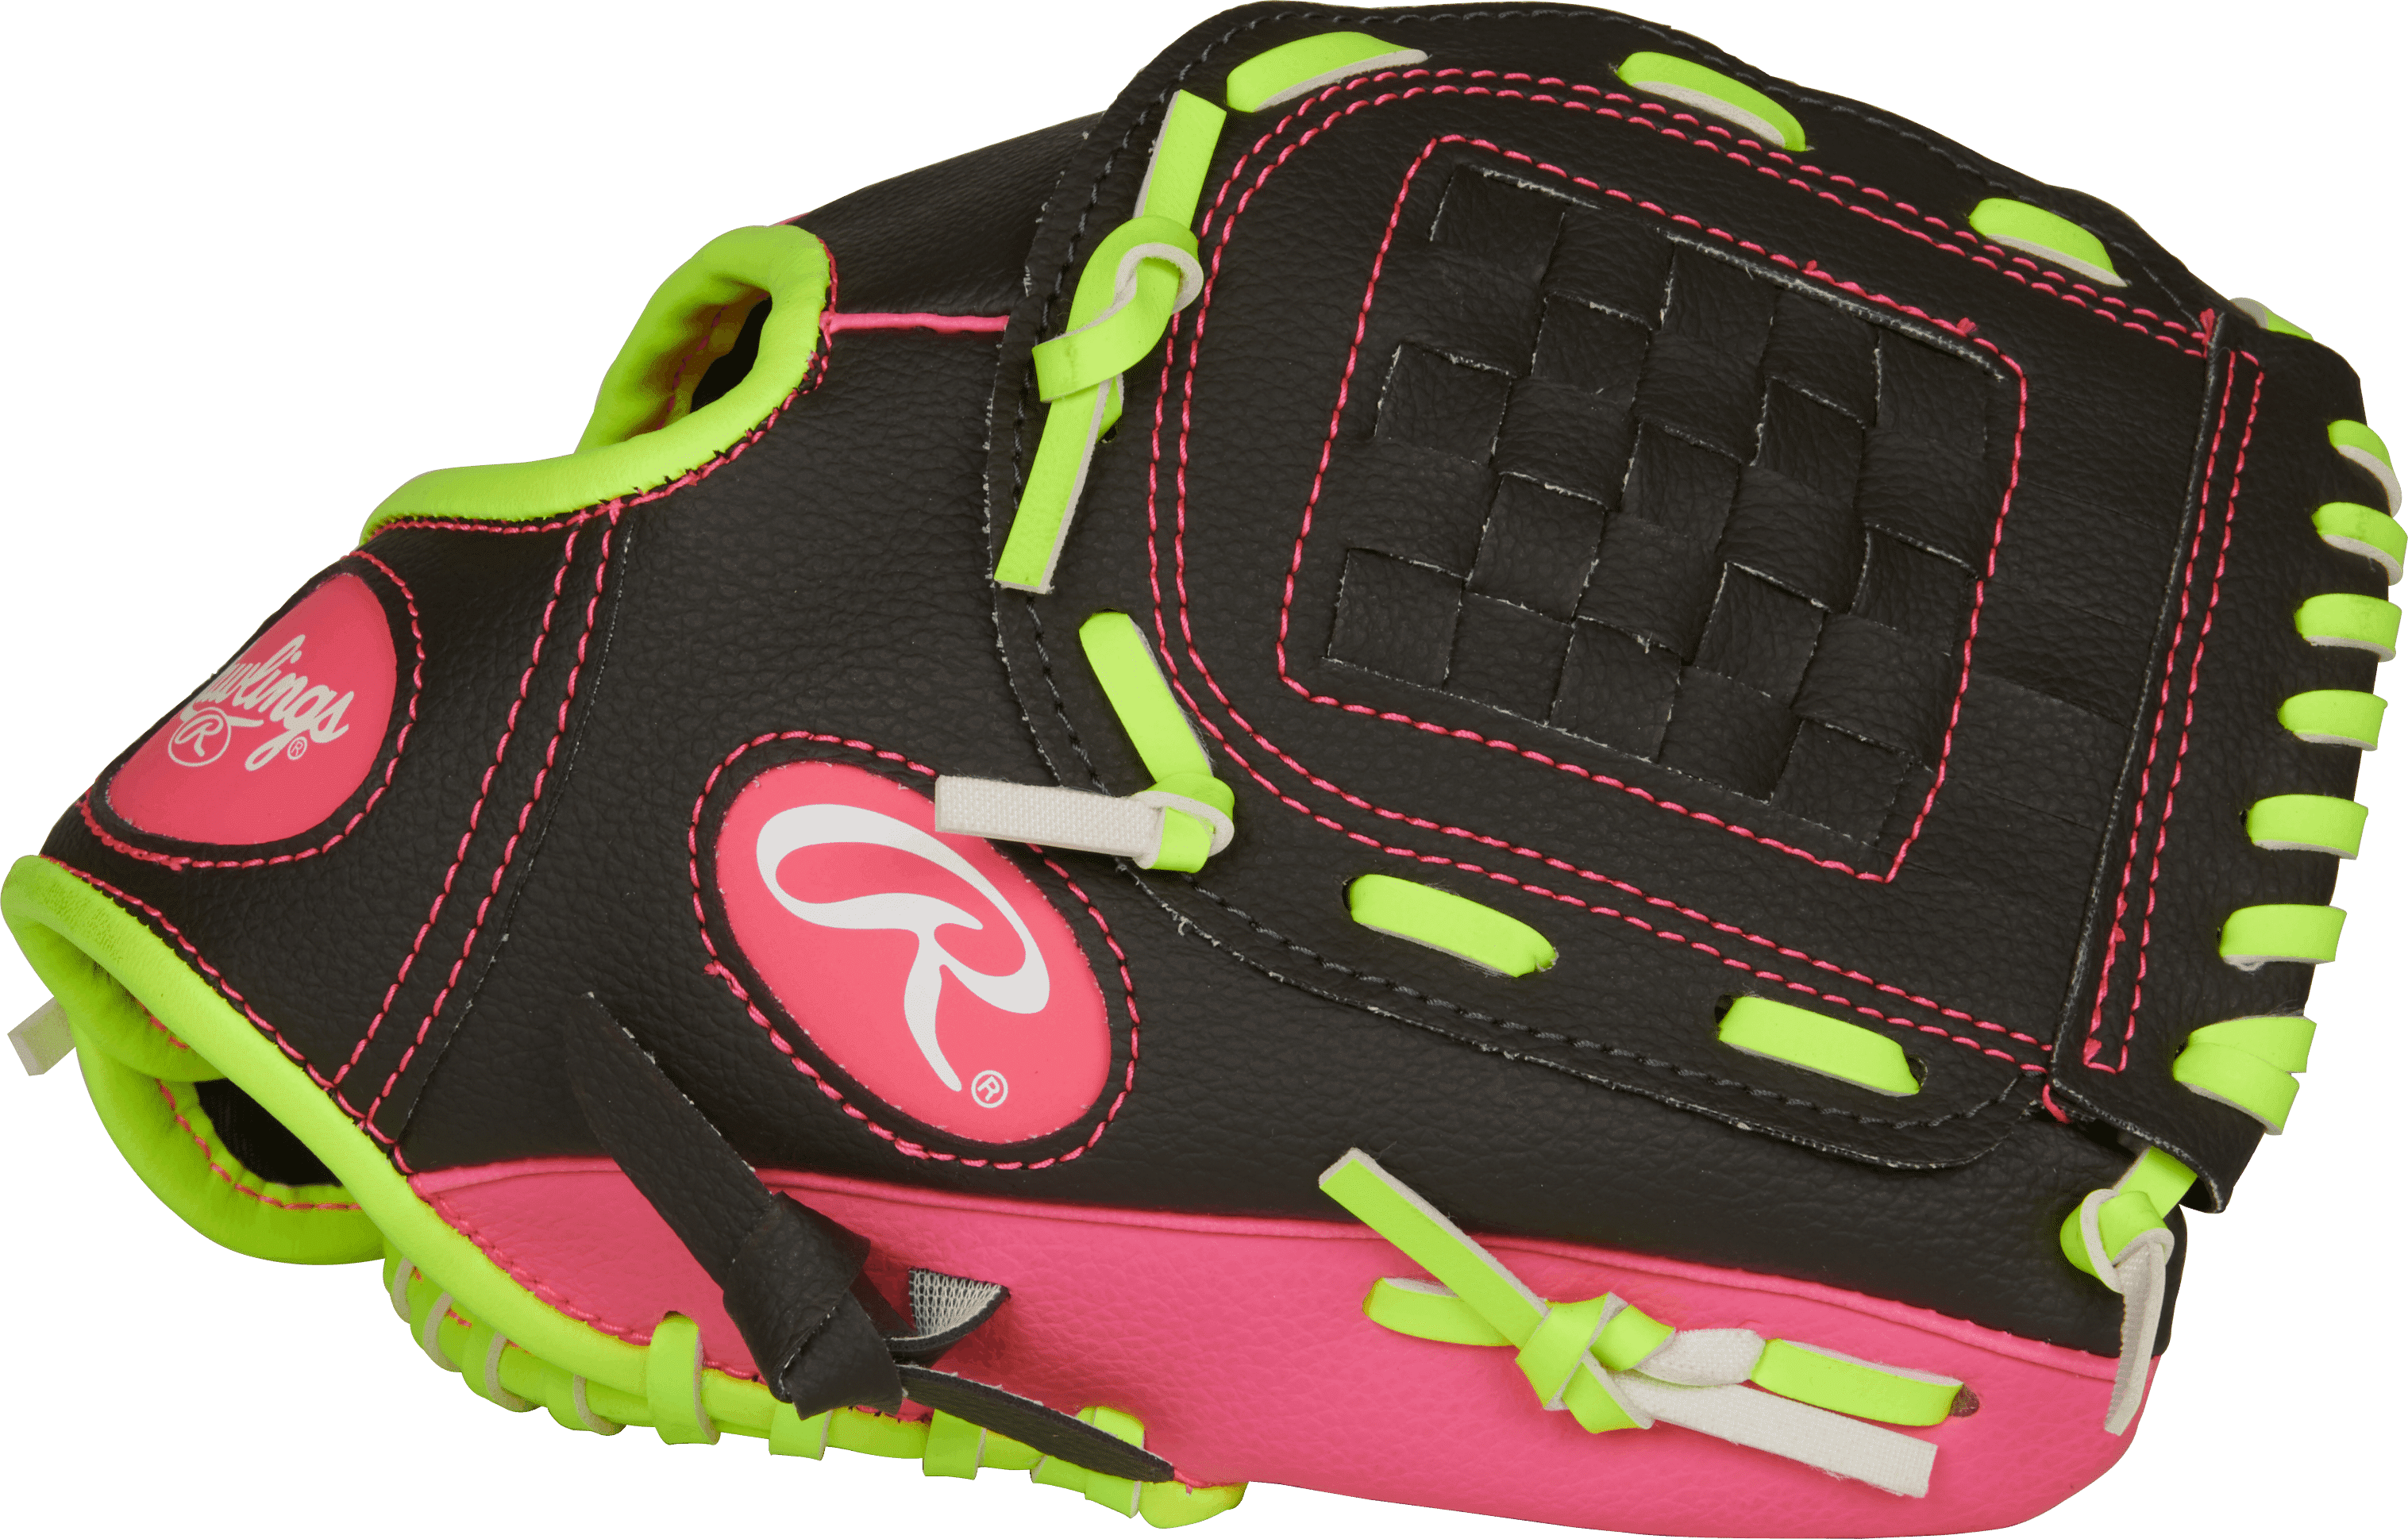 Rawlings Players Series Youth Tball Glove with Ball, 9.5 inch, Right Hand Throw